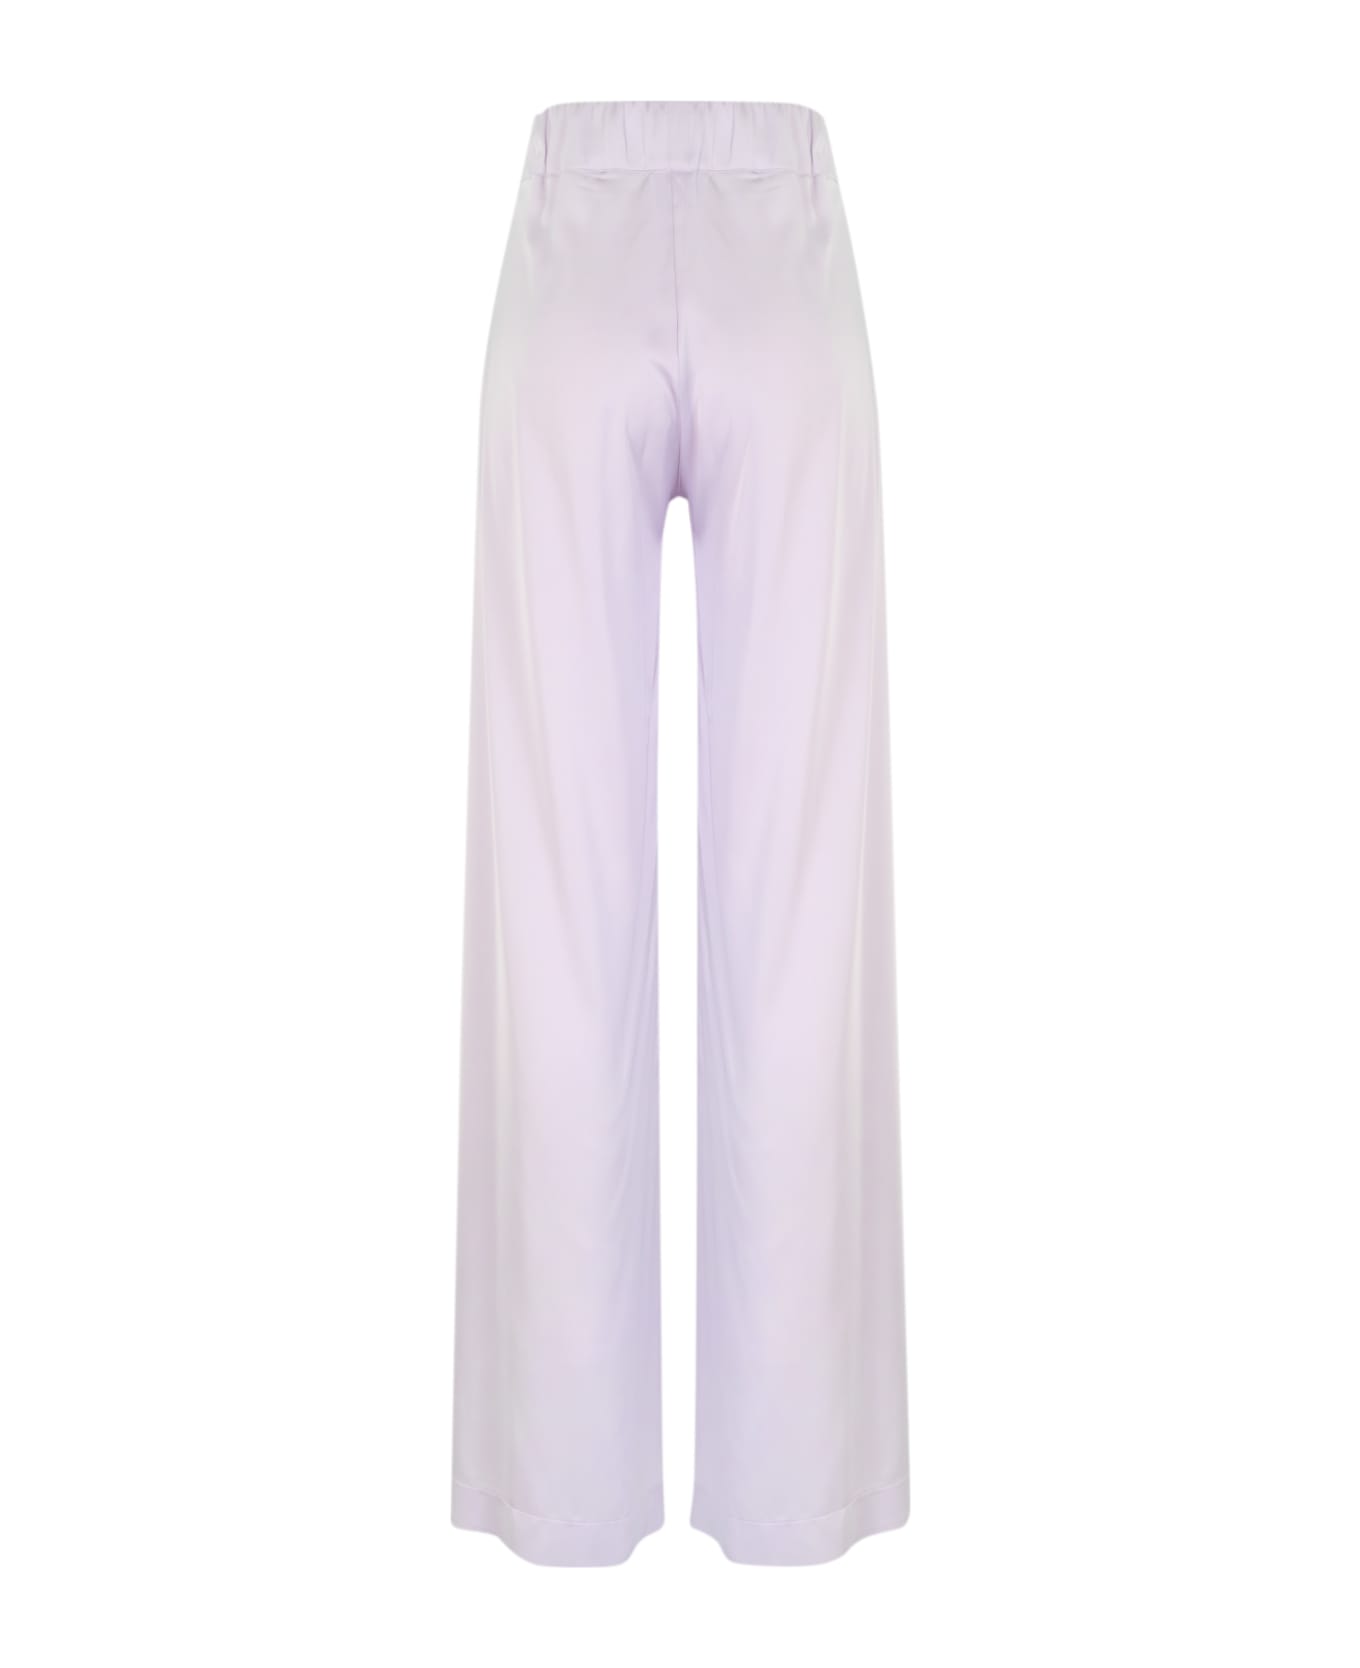 D.Exterior Satin Trousers - Glicine ボトムス